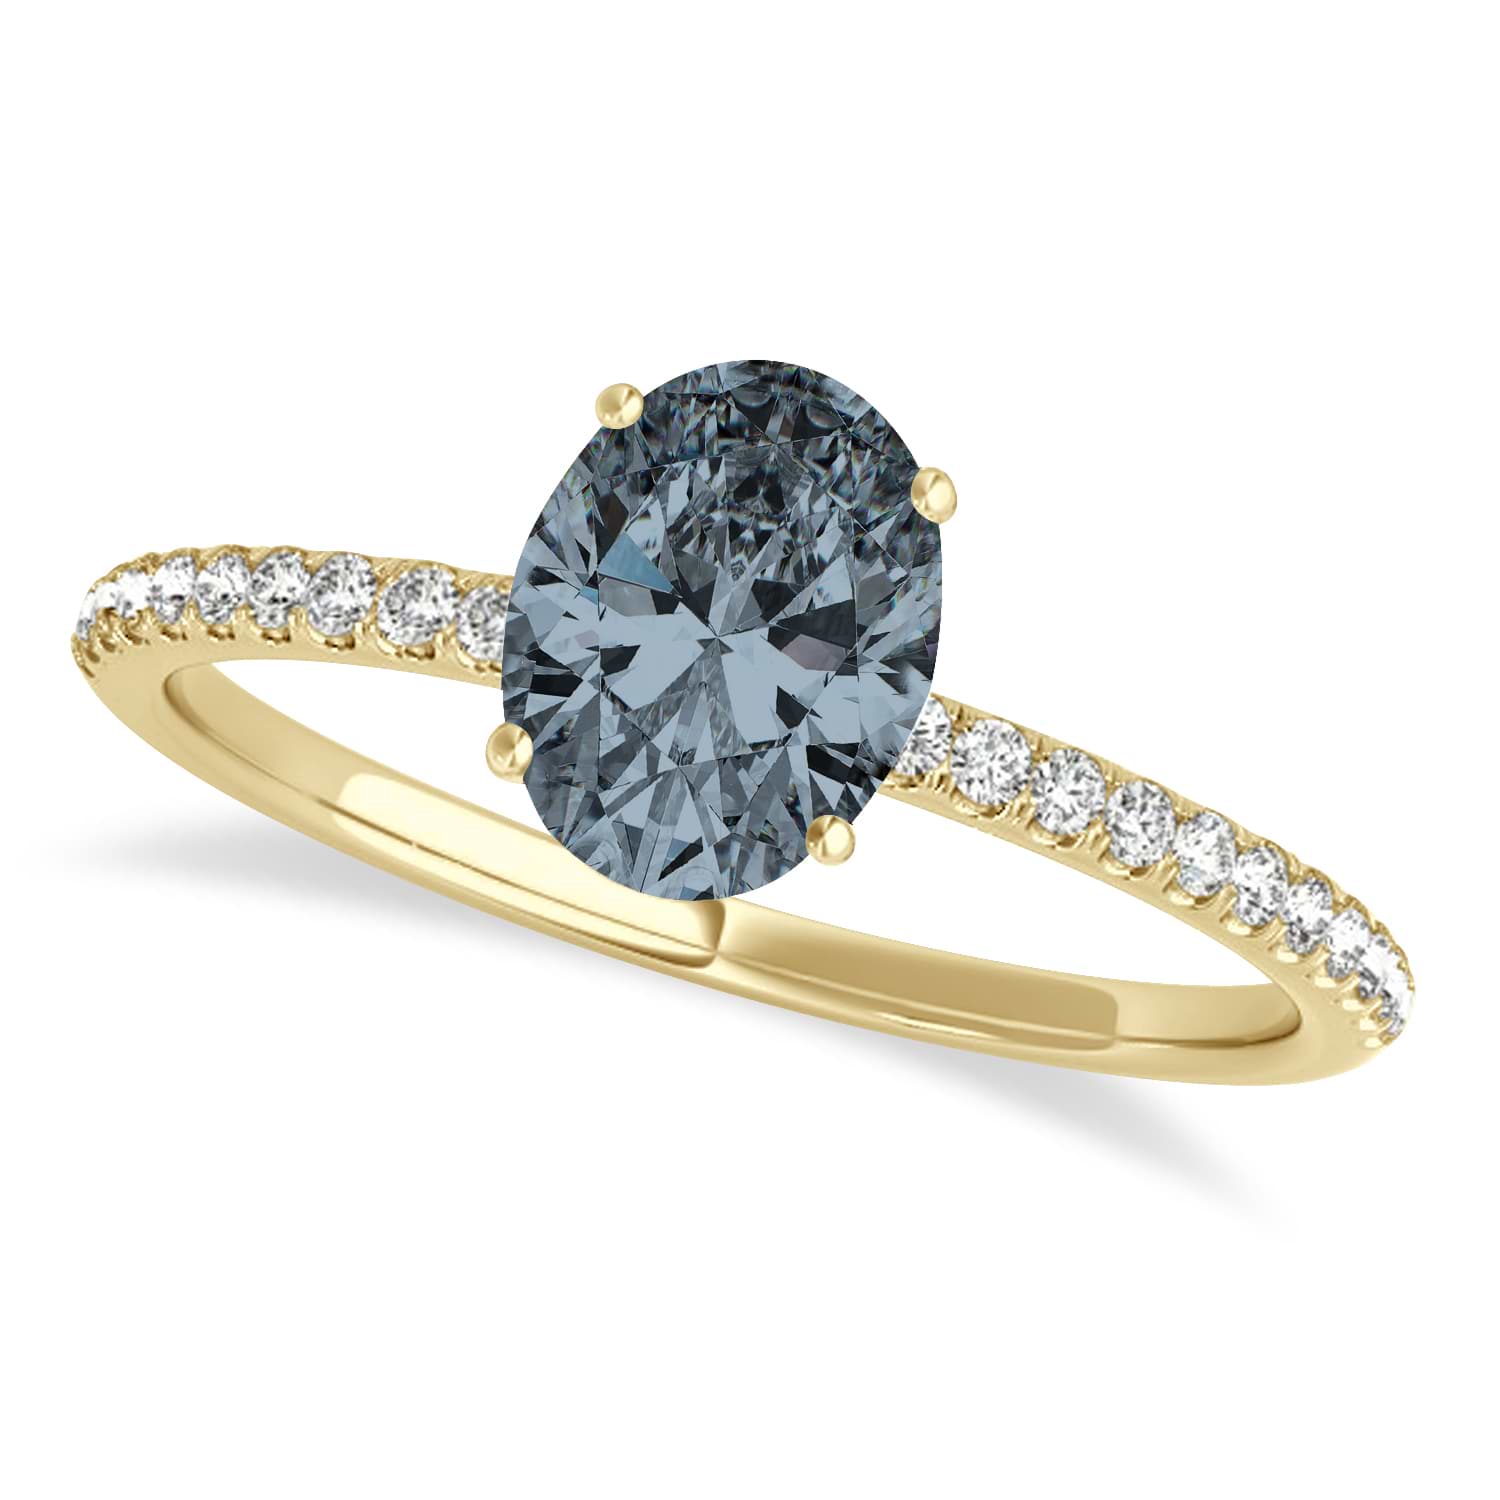 Gray Spinel & Diamond Accented Oval Shape Engagement Ring 18k Yellow Gold (1.00ct)